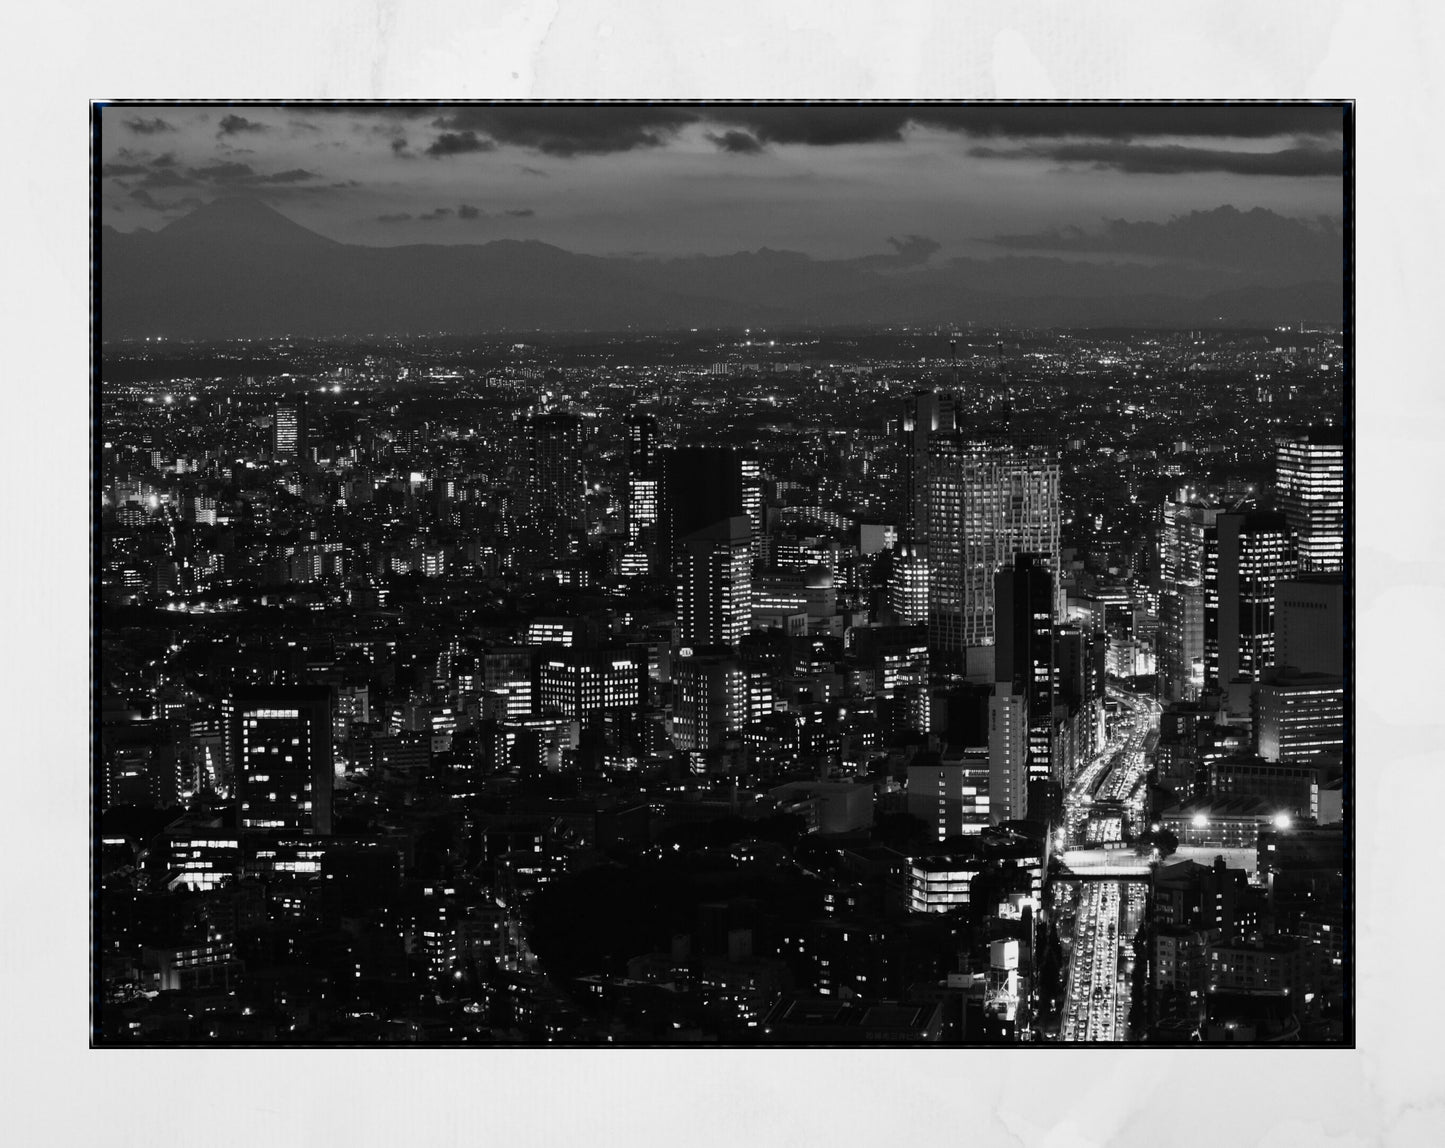 Tokyo Skyline At Night Black and White Photography Print